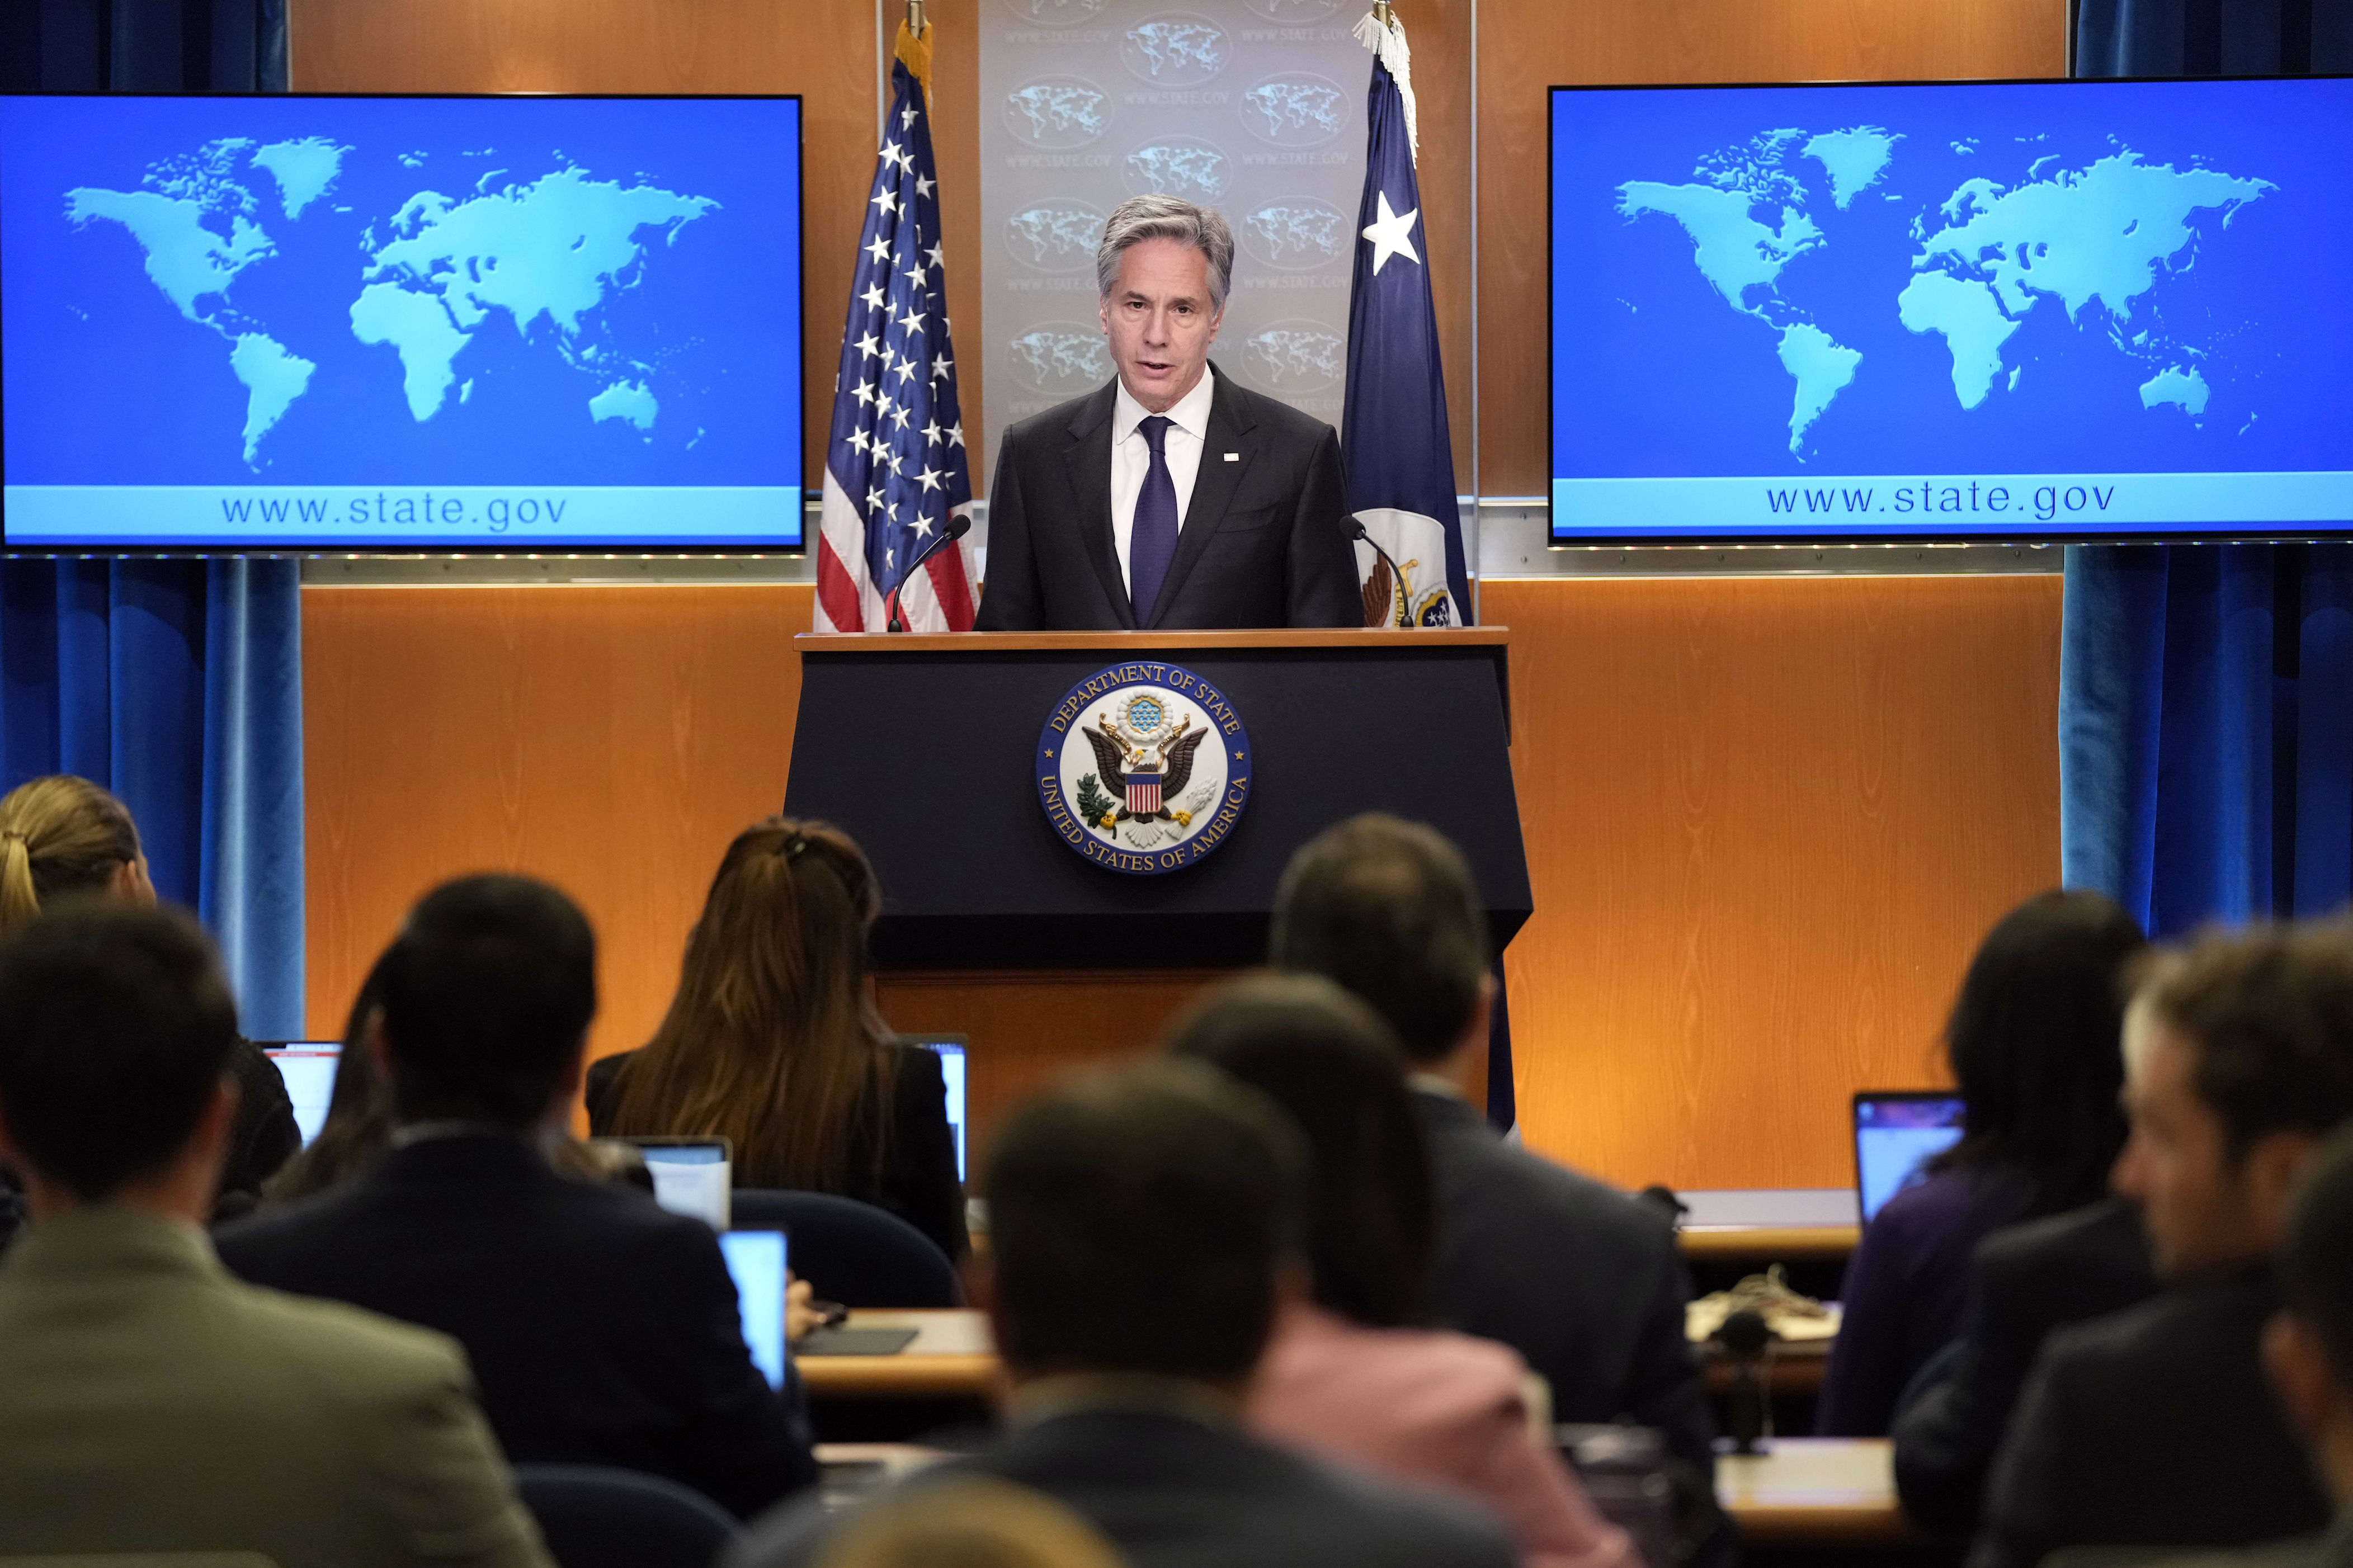 u.s. cites a litany of rights violations in israel, gaza and west bank